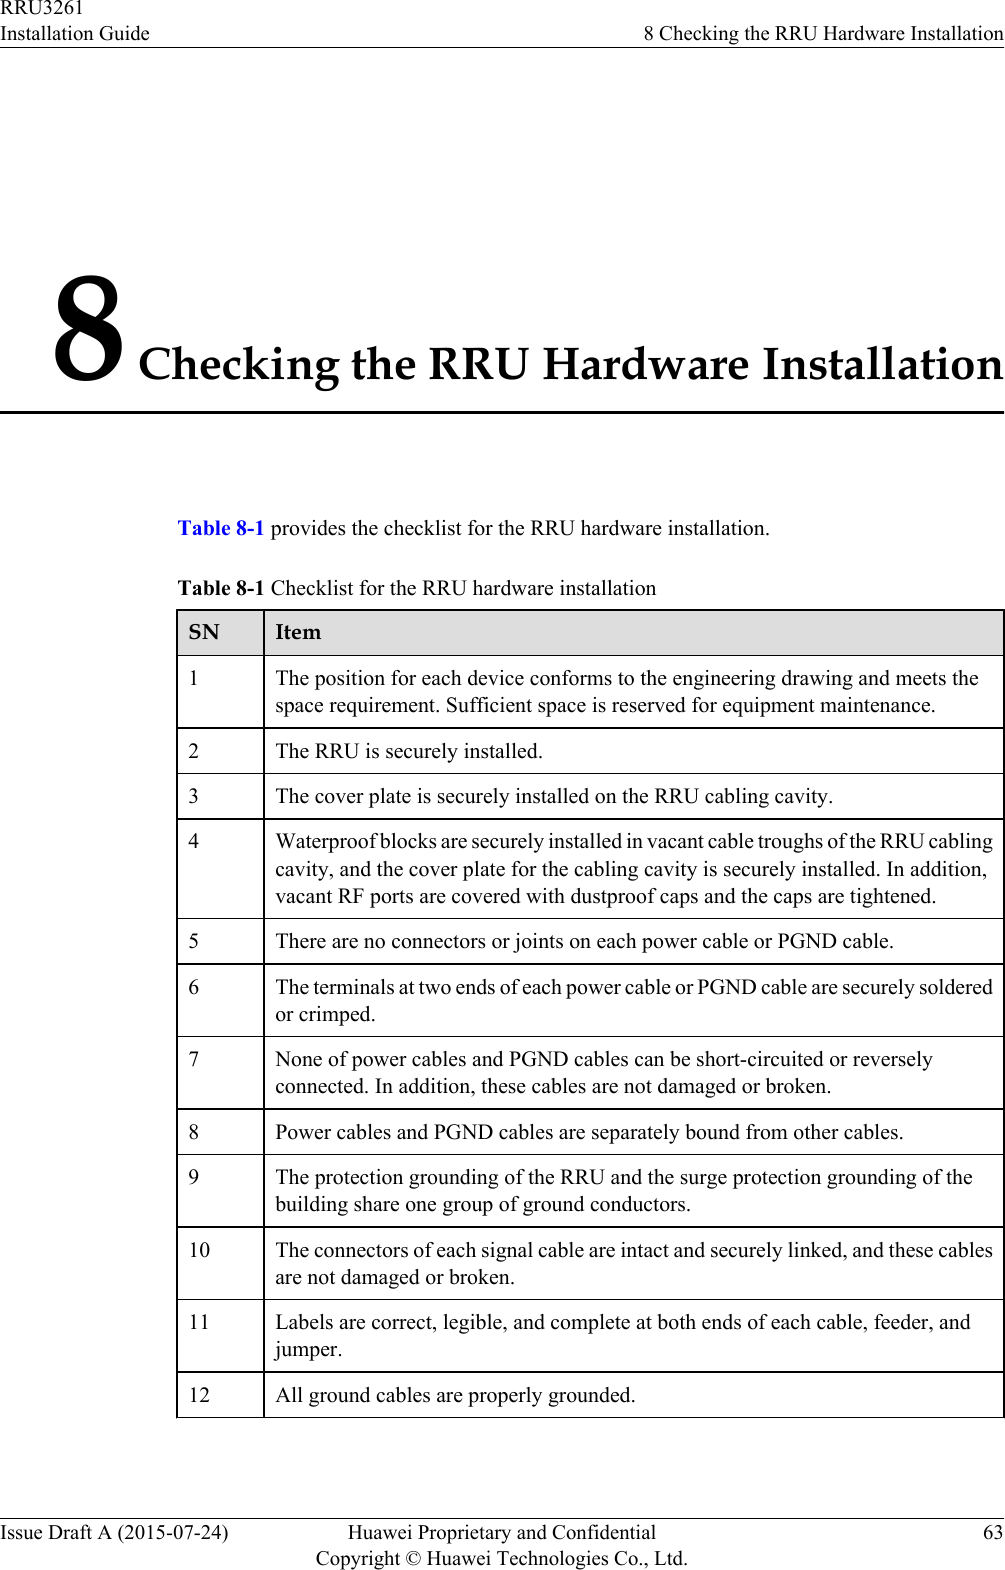 8 Checking the RRU Hardware InstallationTable 8-1 provides the checklist for the RRU hardware installation.Table 8-1 Checklist for the RRU hardware installationSN Item1The position for each device conforms to the engineering drawing and meets thespace requirement. Sufficient space is reserved for equipment maintenance.2 The RRU is securely installed.3 The cover plate is securely installed on the RRU cabling cavity.4 Waterproof blocks are securely installed in vacant cable troughs of the RRU cablingcavity, and the cover plate for the cabling cavity is securely installed. In addition,vacant RF ports are covered with dustproof caps and the caps are tightened.5 There are no connectors or joints on each power cable or PGND cable.6 The terminals at two ends of each power cable or PGND cable are securely solderedor crimped.7 None of power cables and PGND cables can be short-circuited or reverselyconnected. In addition, these cables are not damaged or broken.8 Power cables and PGND cables are separately bound from other cables.9 The protection grounding of the RRU and the surge protection grounding of thebuilding share one group of ground conductors.10 The connectors of each signal cable are intact and securely linked, and these cablesare not damaged or broken.11 Labels are correct, legible, and complete at both ends of each cable, feeder, andjumper.12 All ground cables are properly grounded.RRU3261Installation Guide 8 Checking the RRU Hardware InstallationIssue Draft A (2015-07-24) Huawei Proprietary and ConfidentialCopyright © Huawei Technologies Co., Ltd.63